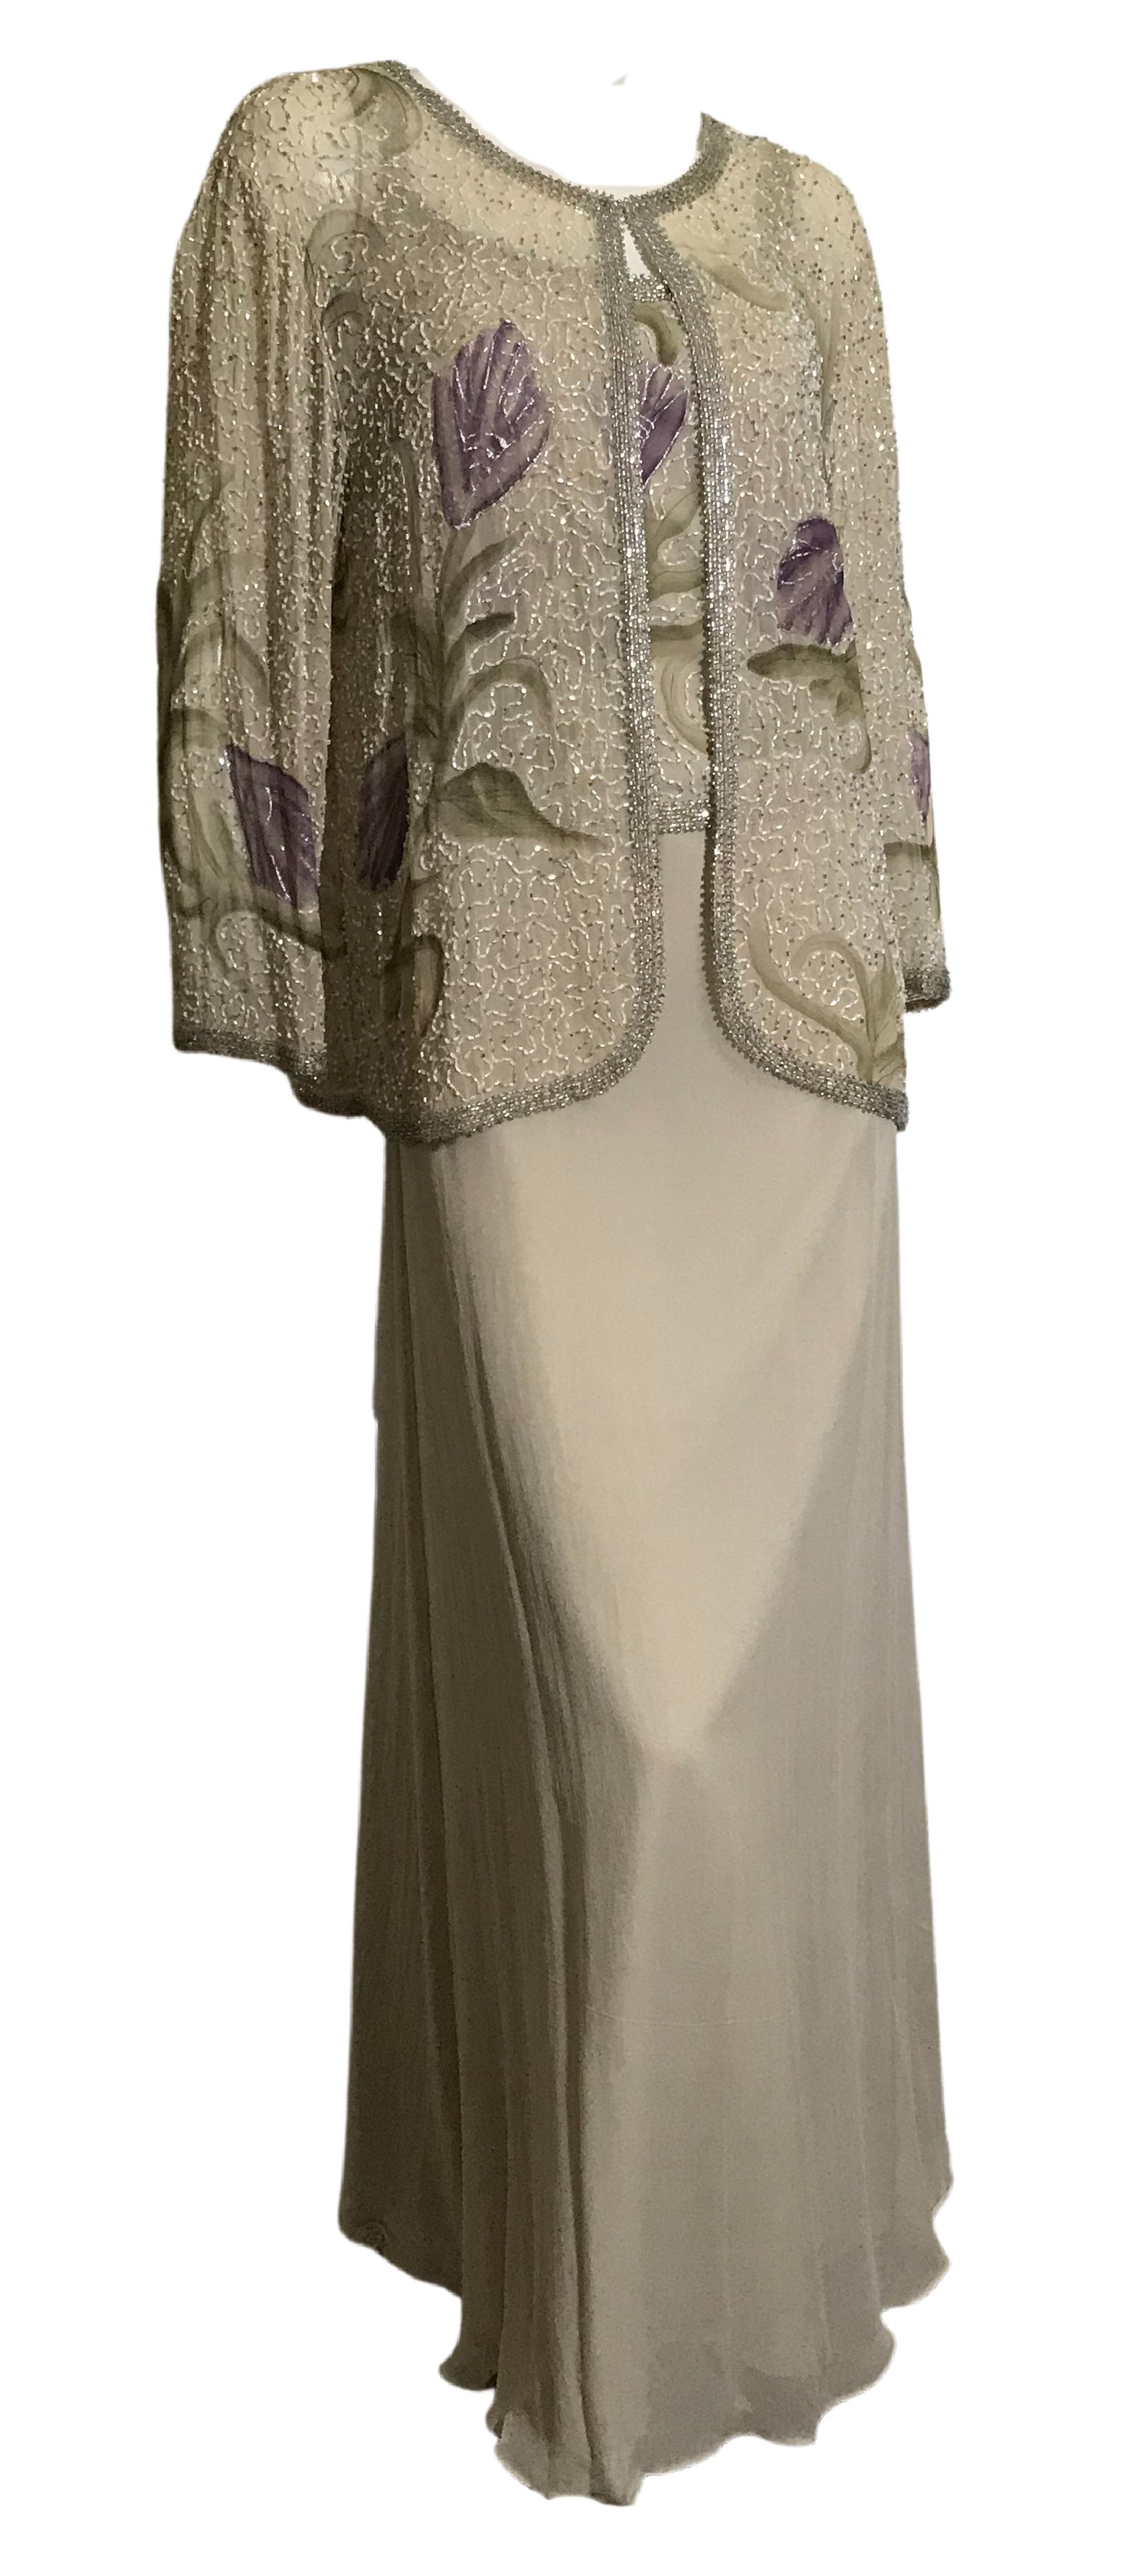 RESERVED 1930s Style Creme Colored Silk Dress and Jacket Hand Painted and Beaded circa 1990s